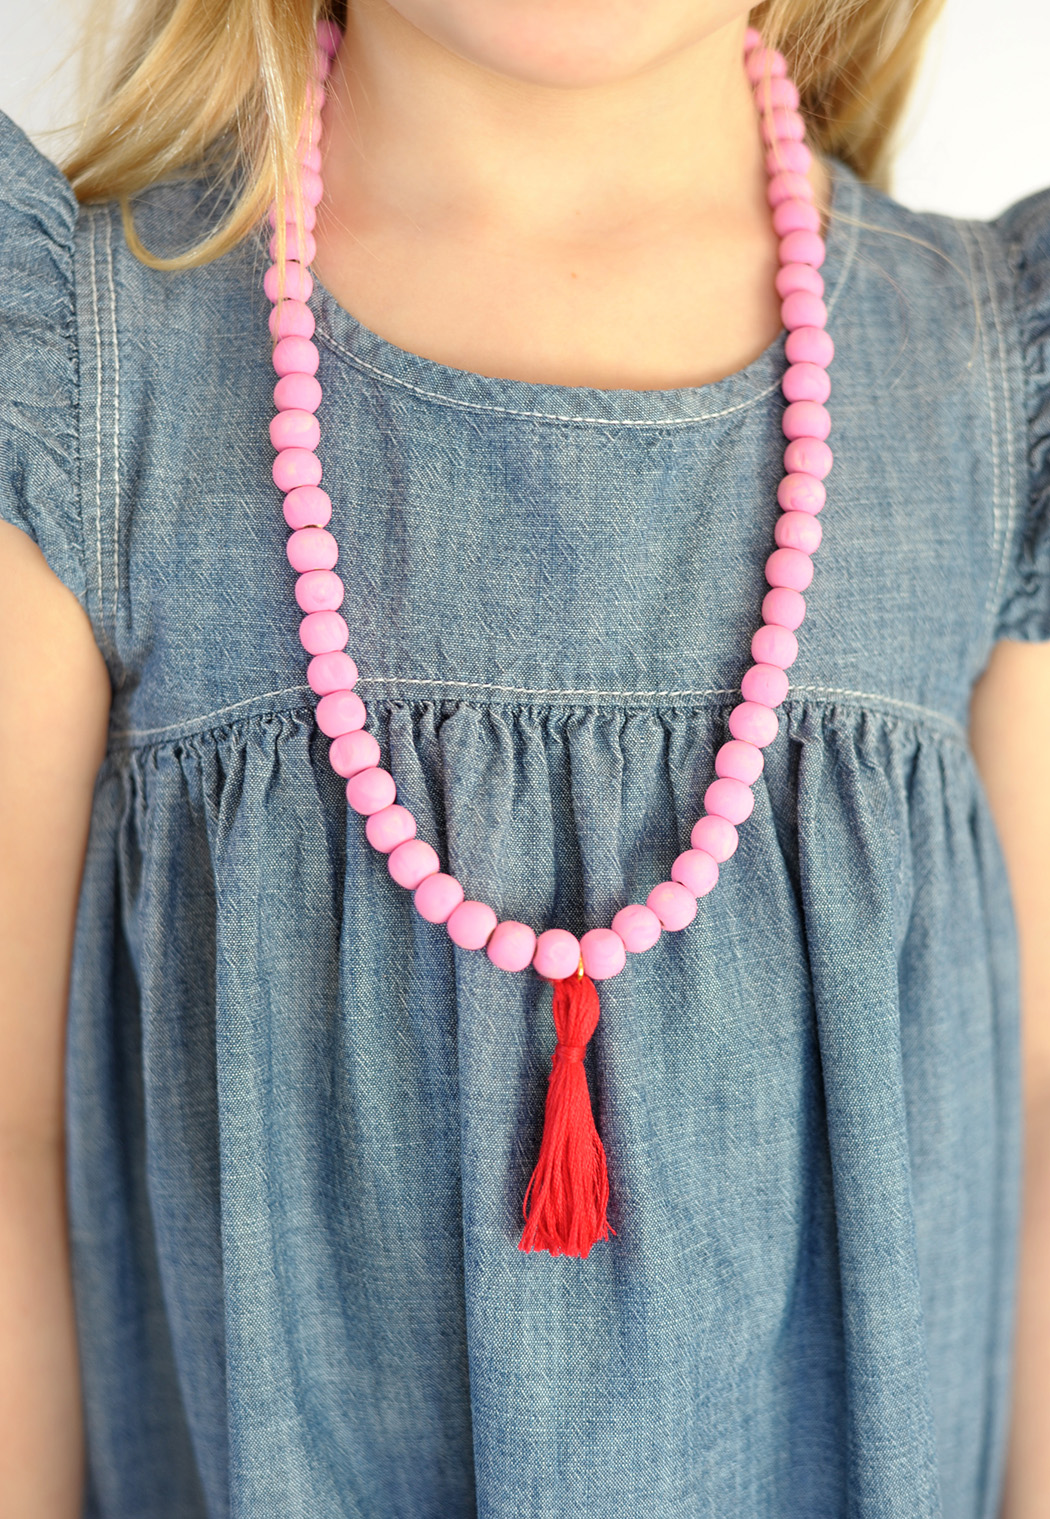 Make this cute wooden bead tassel necklace for Valentine's Day // aliceandlois.com